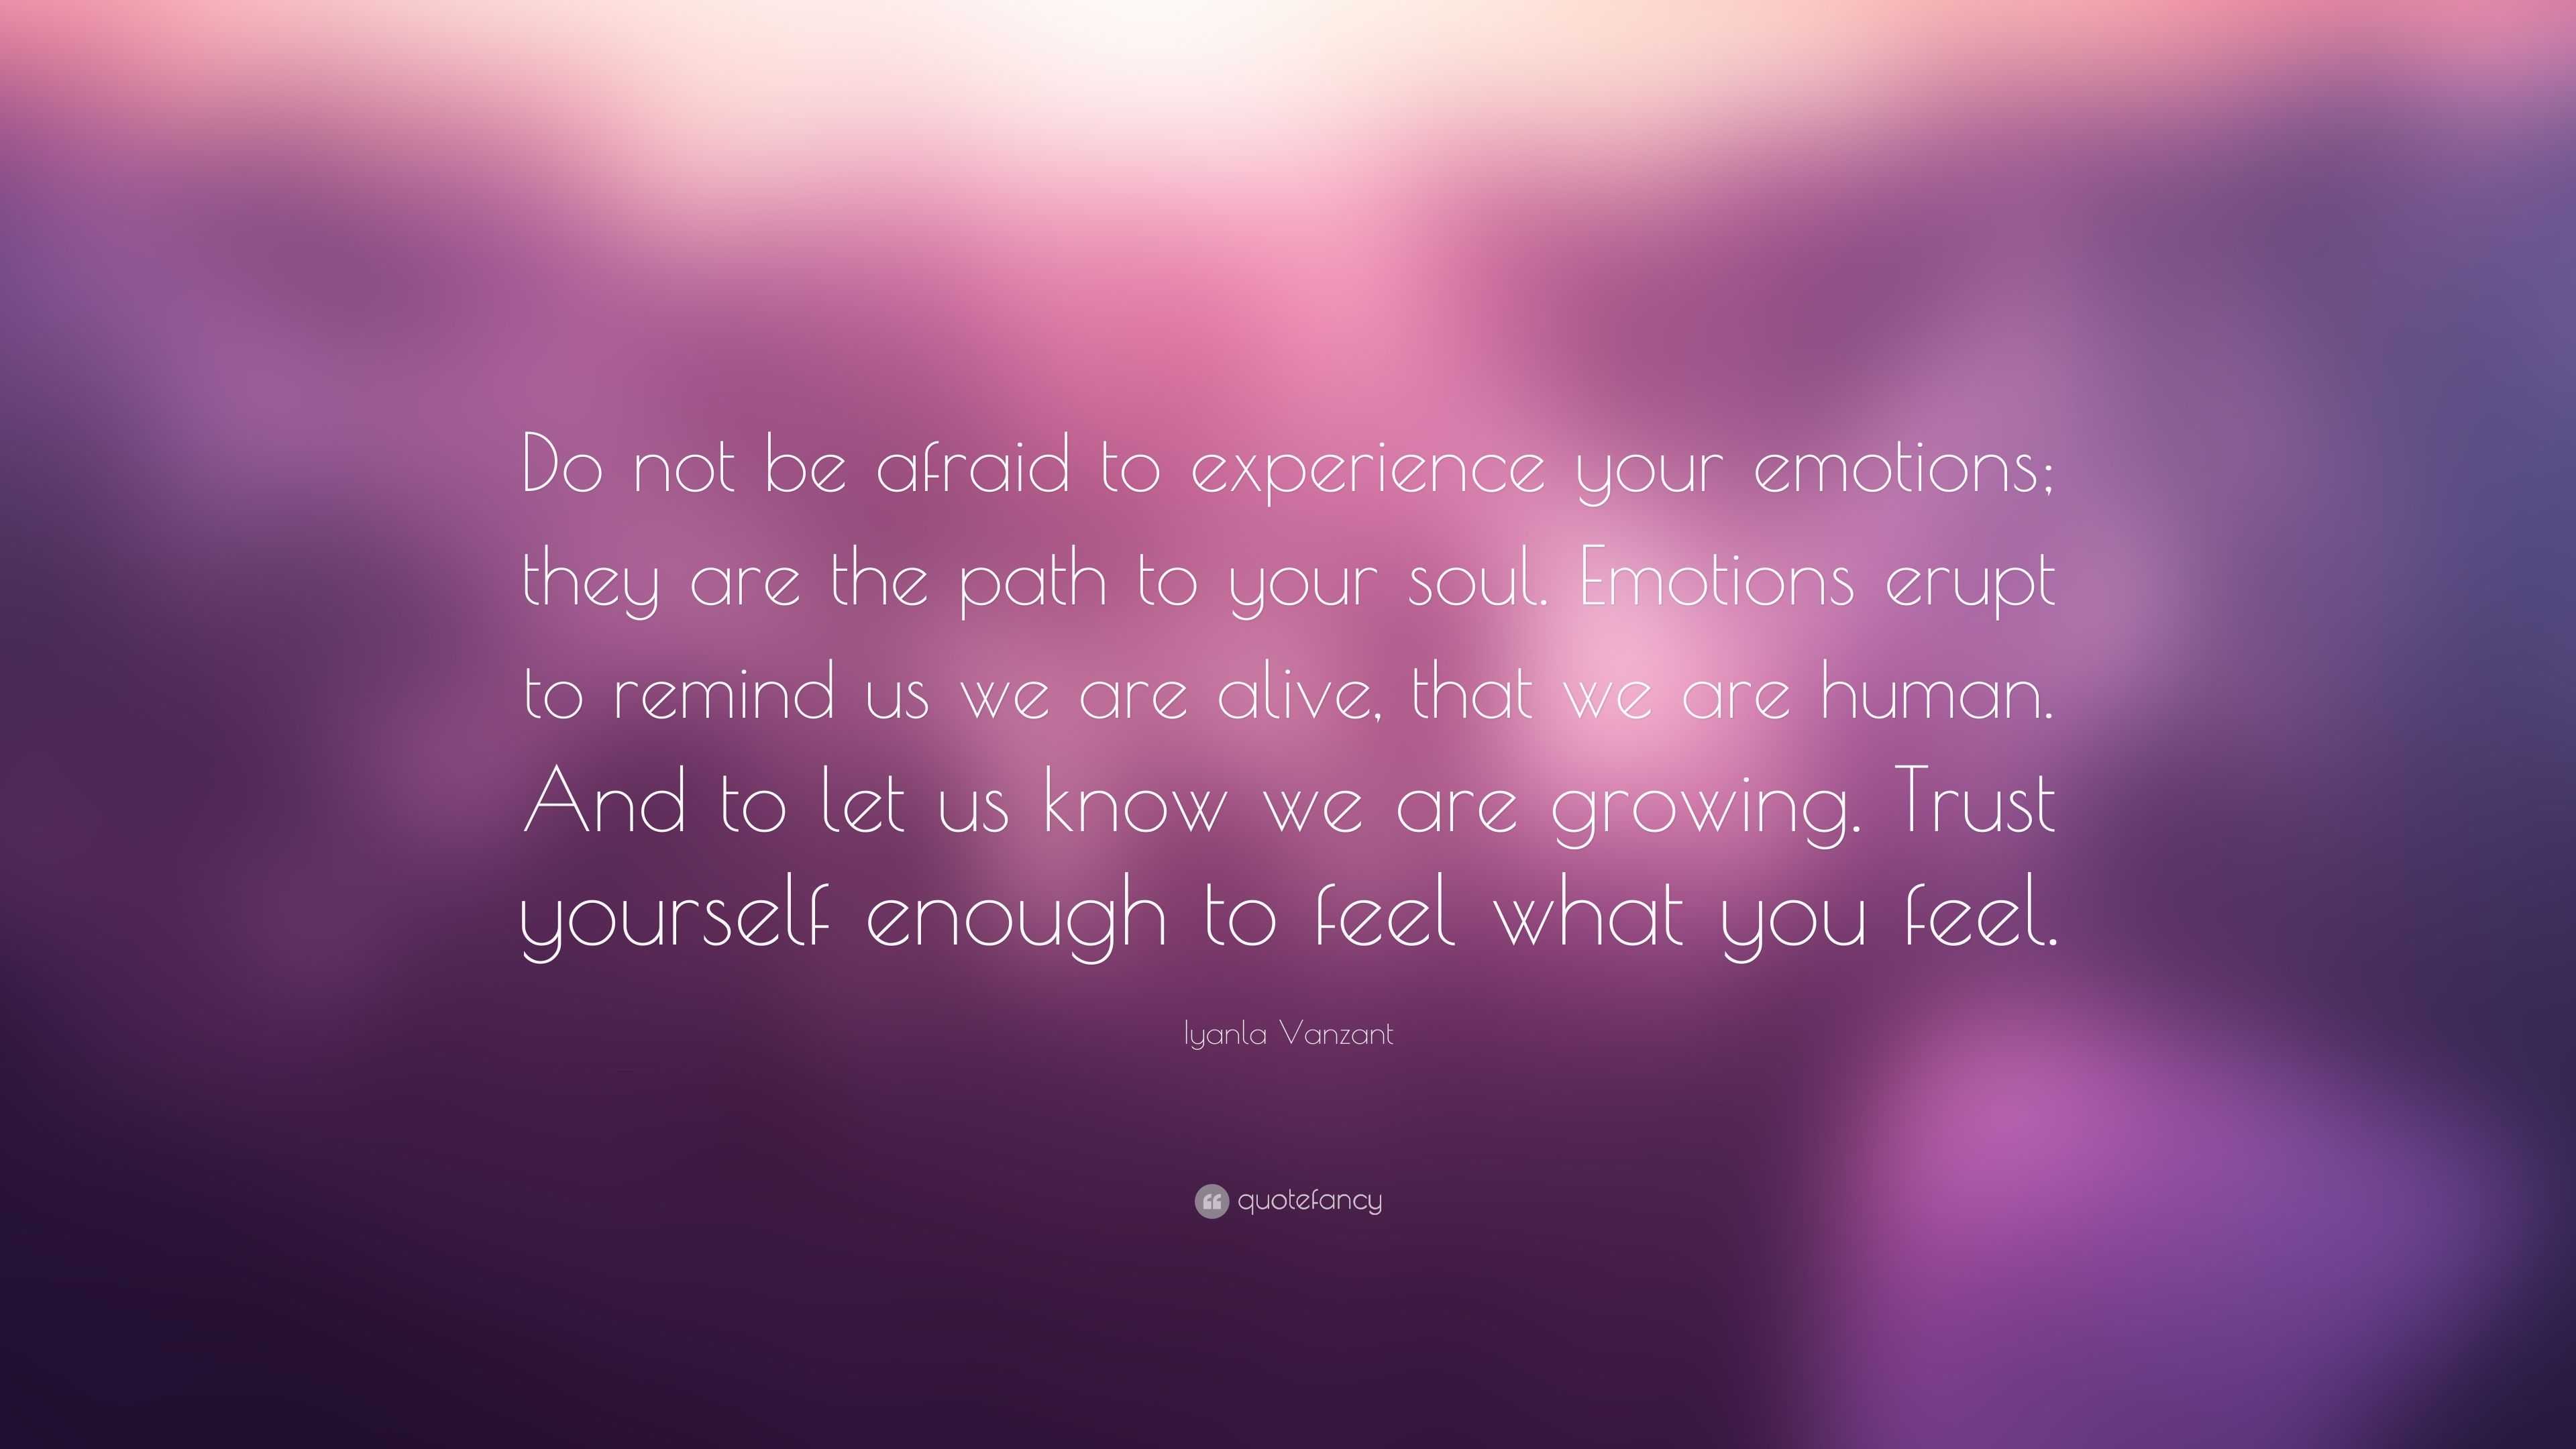 Iyanla Vanzant Quote: “Do not be afraid to experience your emotions ...